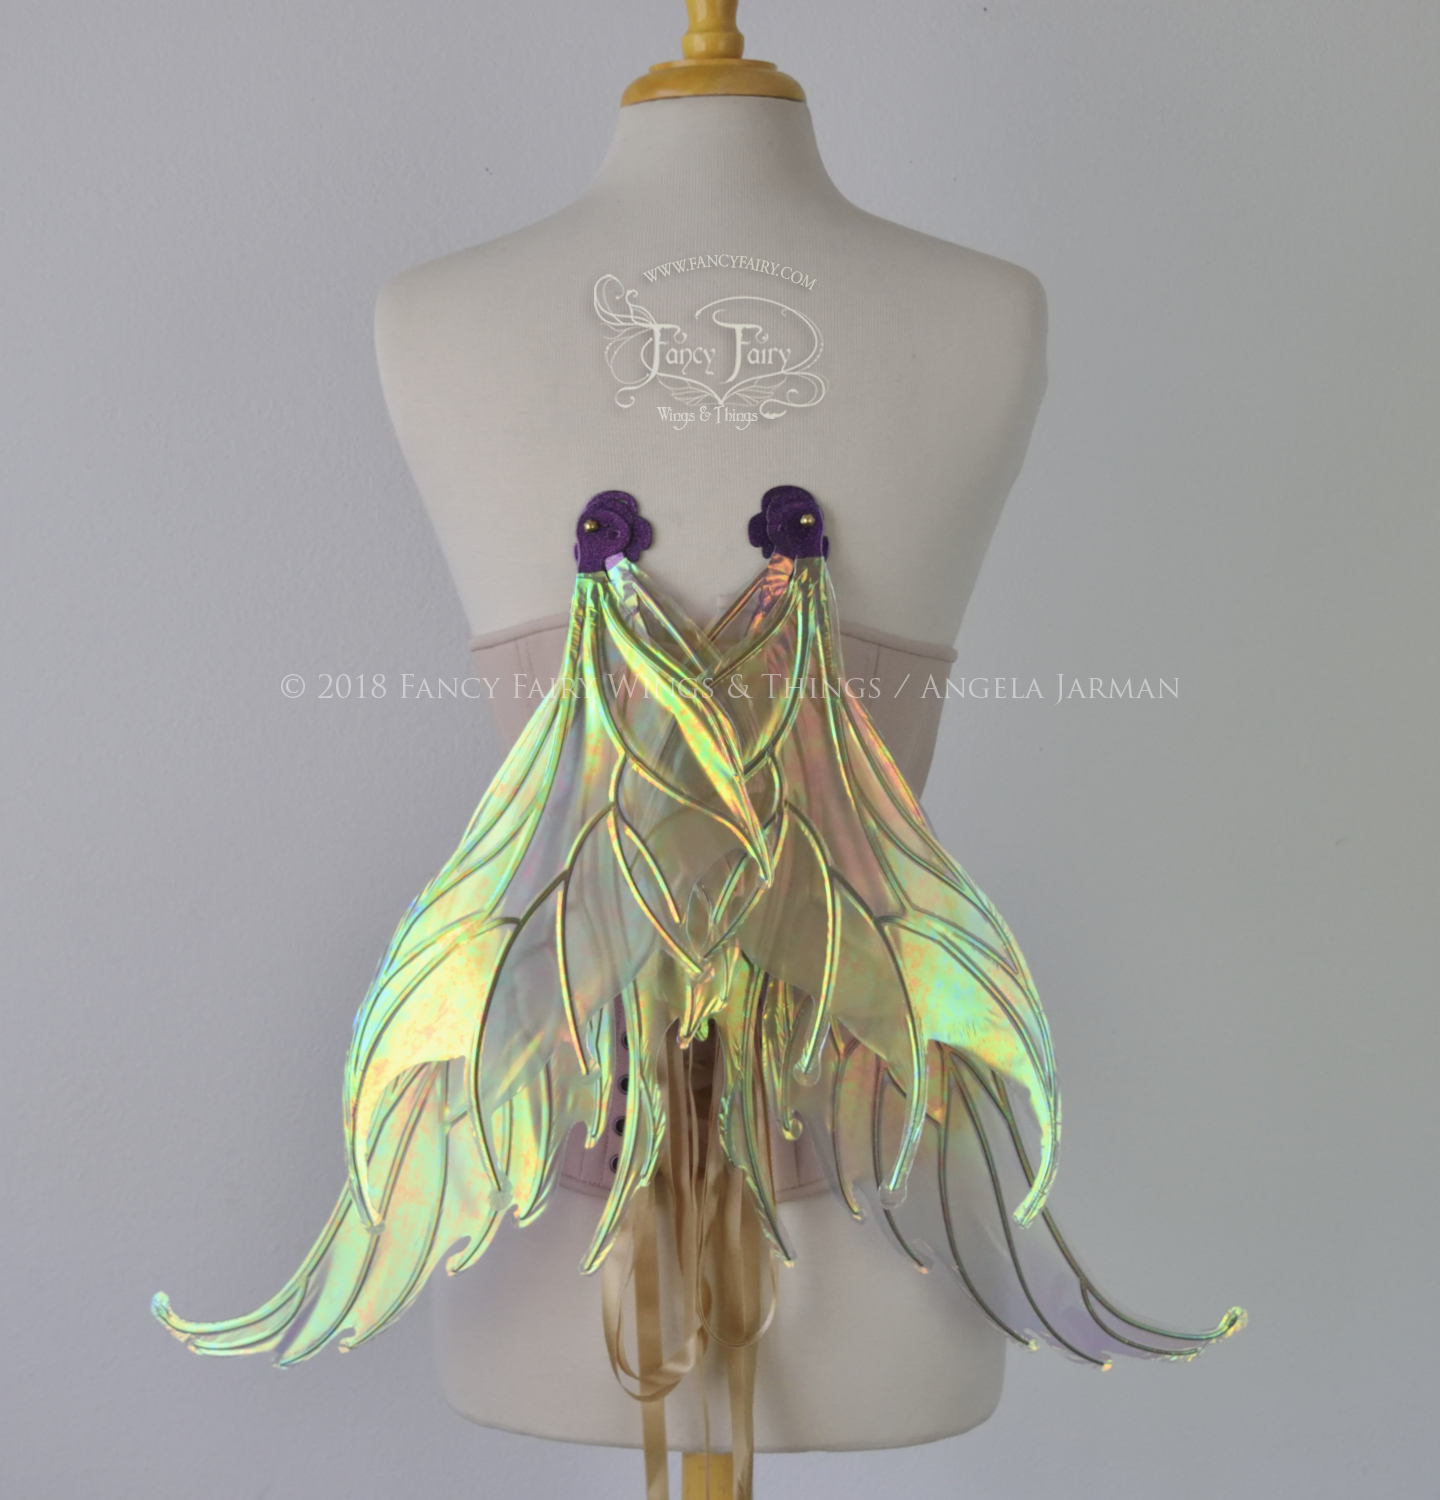 Aquatica Iridescent Convertible Fairy Wings in Patina with Chameleon Cherry Violet Glitter veins